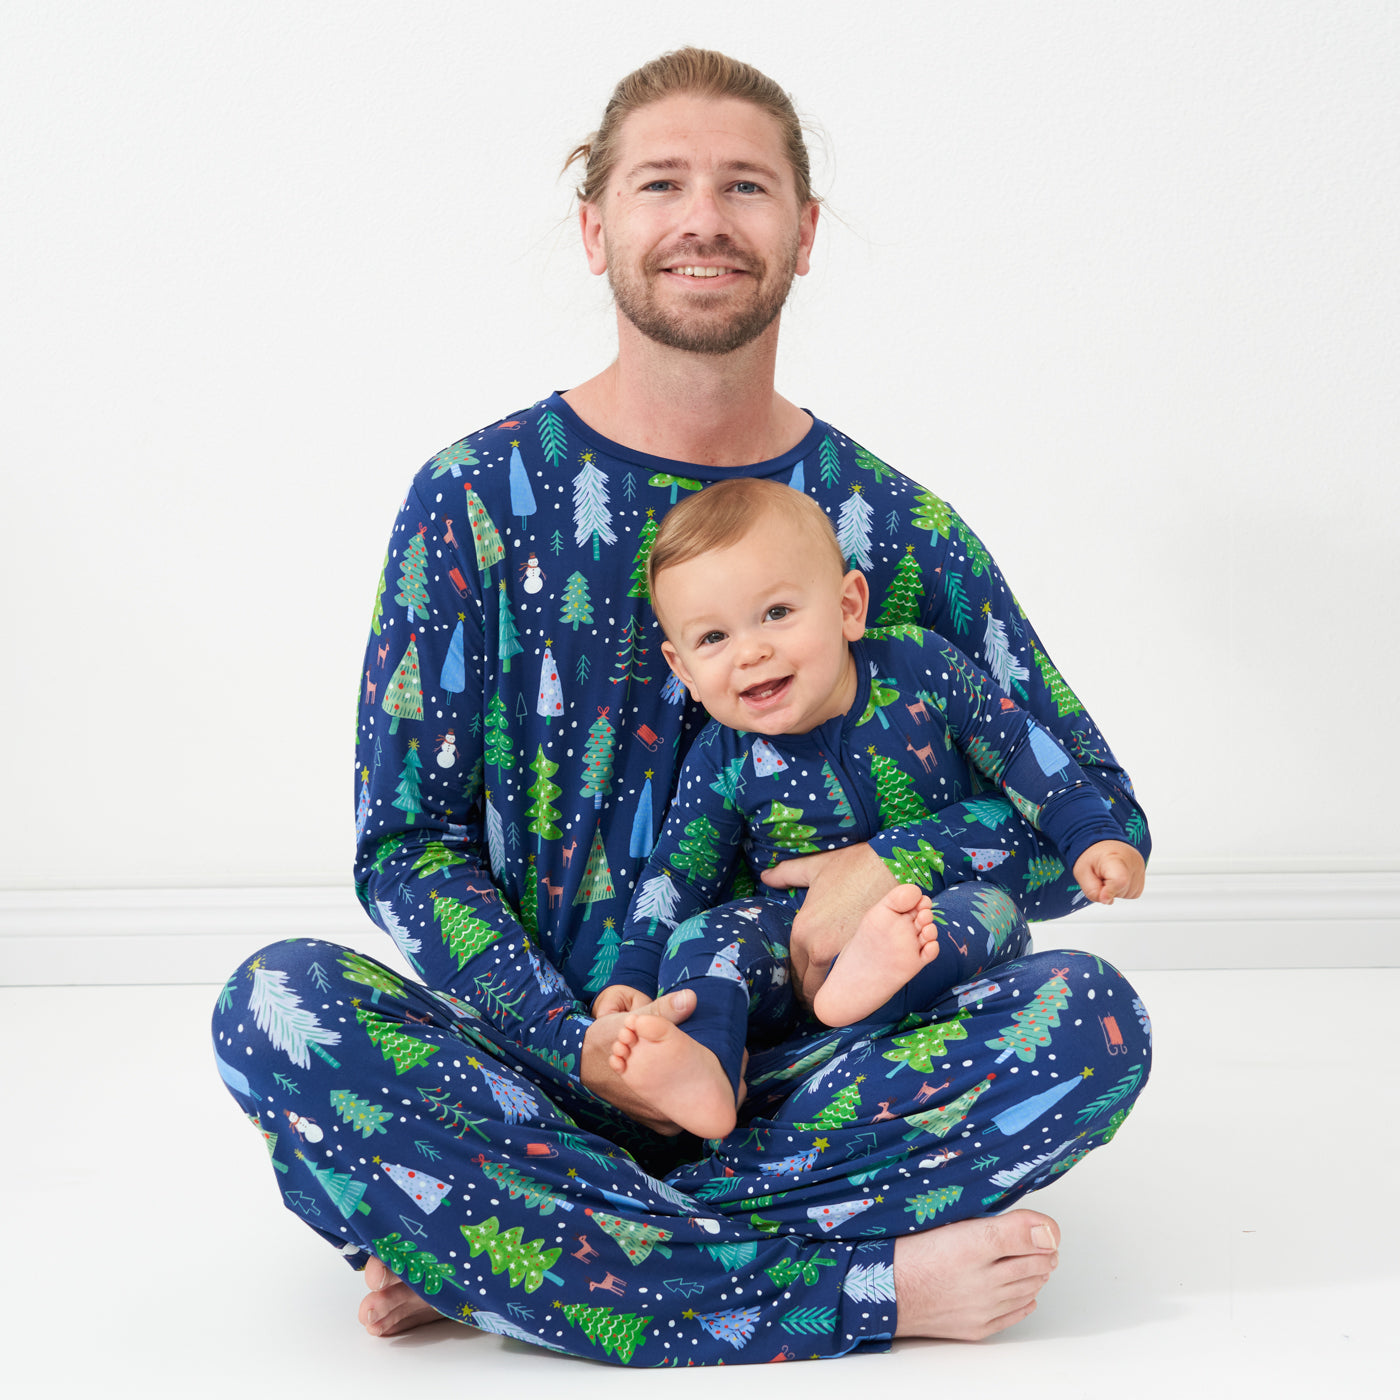 Father and son sitting together wearing matching Blue Merry and Bright pajamas. Dad is wearing Blue Merry and Bright printed men's pajama top and matching men's pajama bottoms and his son is wearing a Blue Merry and Bright printed zippy